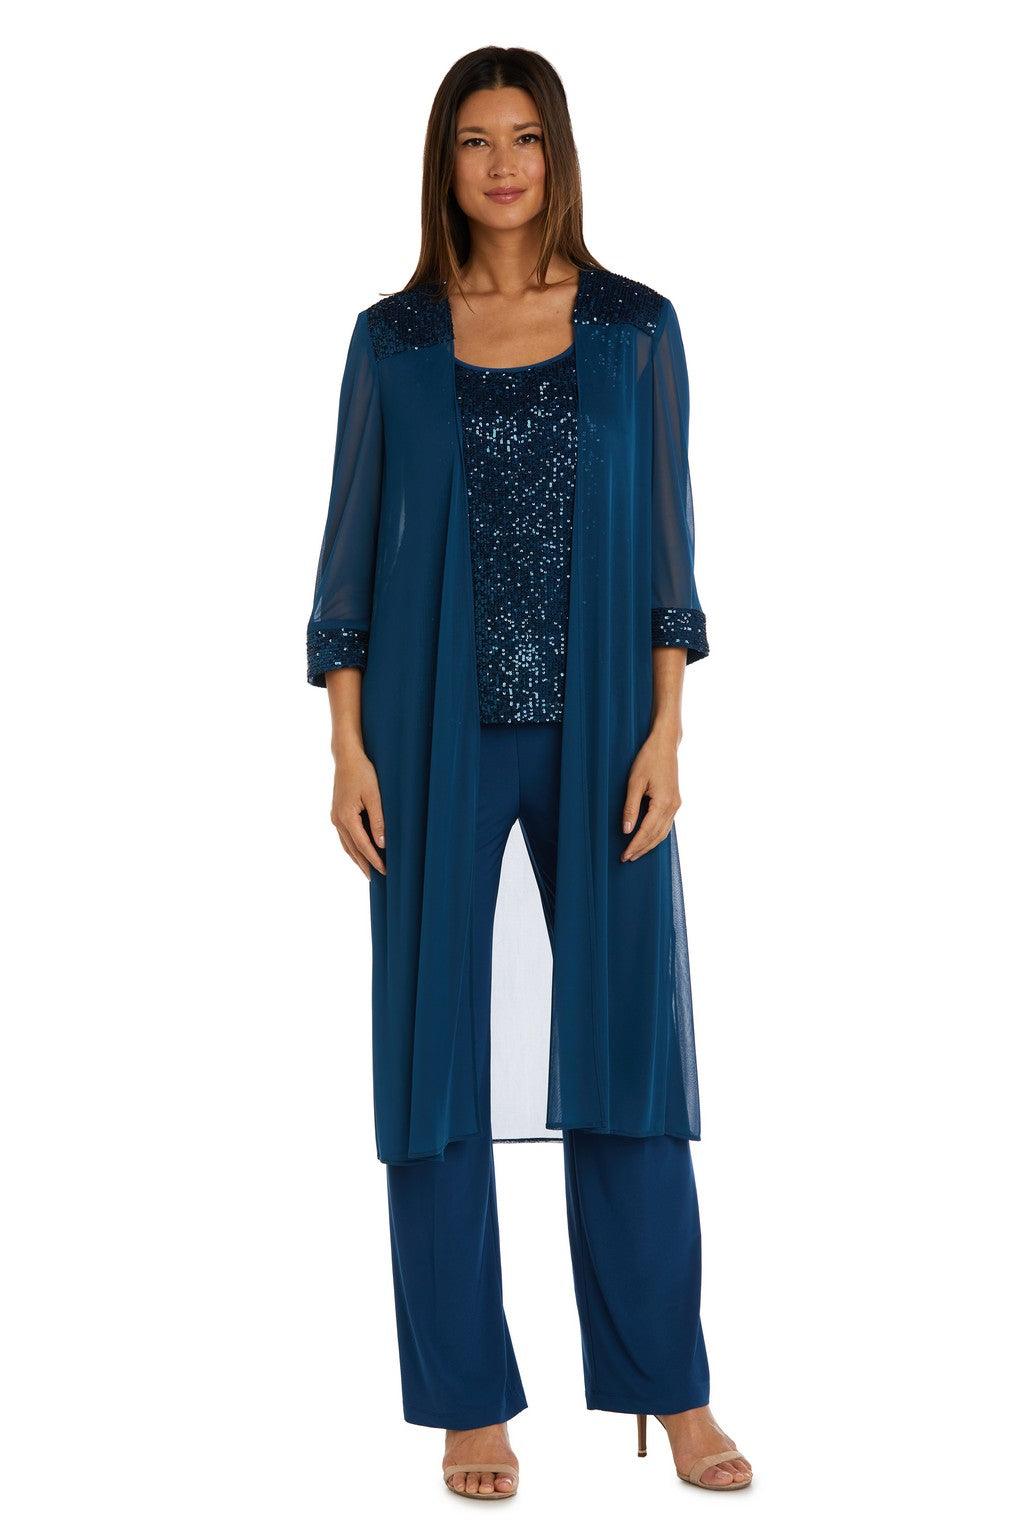 Peacock R&M Richards 2756 Long Formal Sequined Pant Suit for $86.99 ...